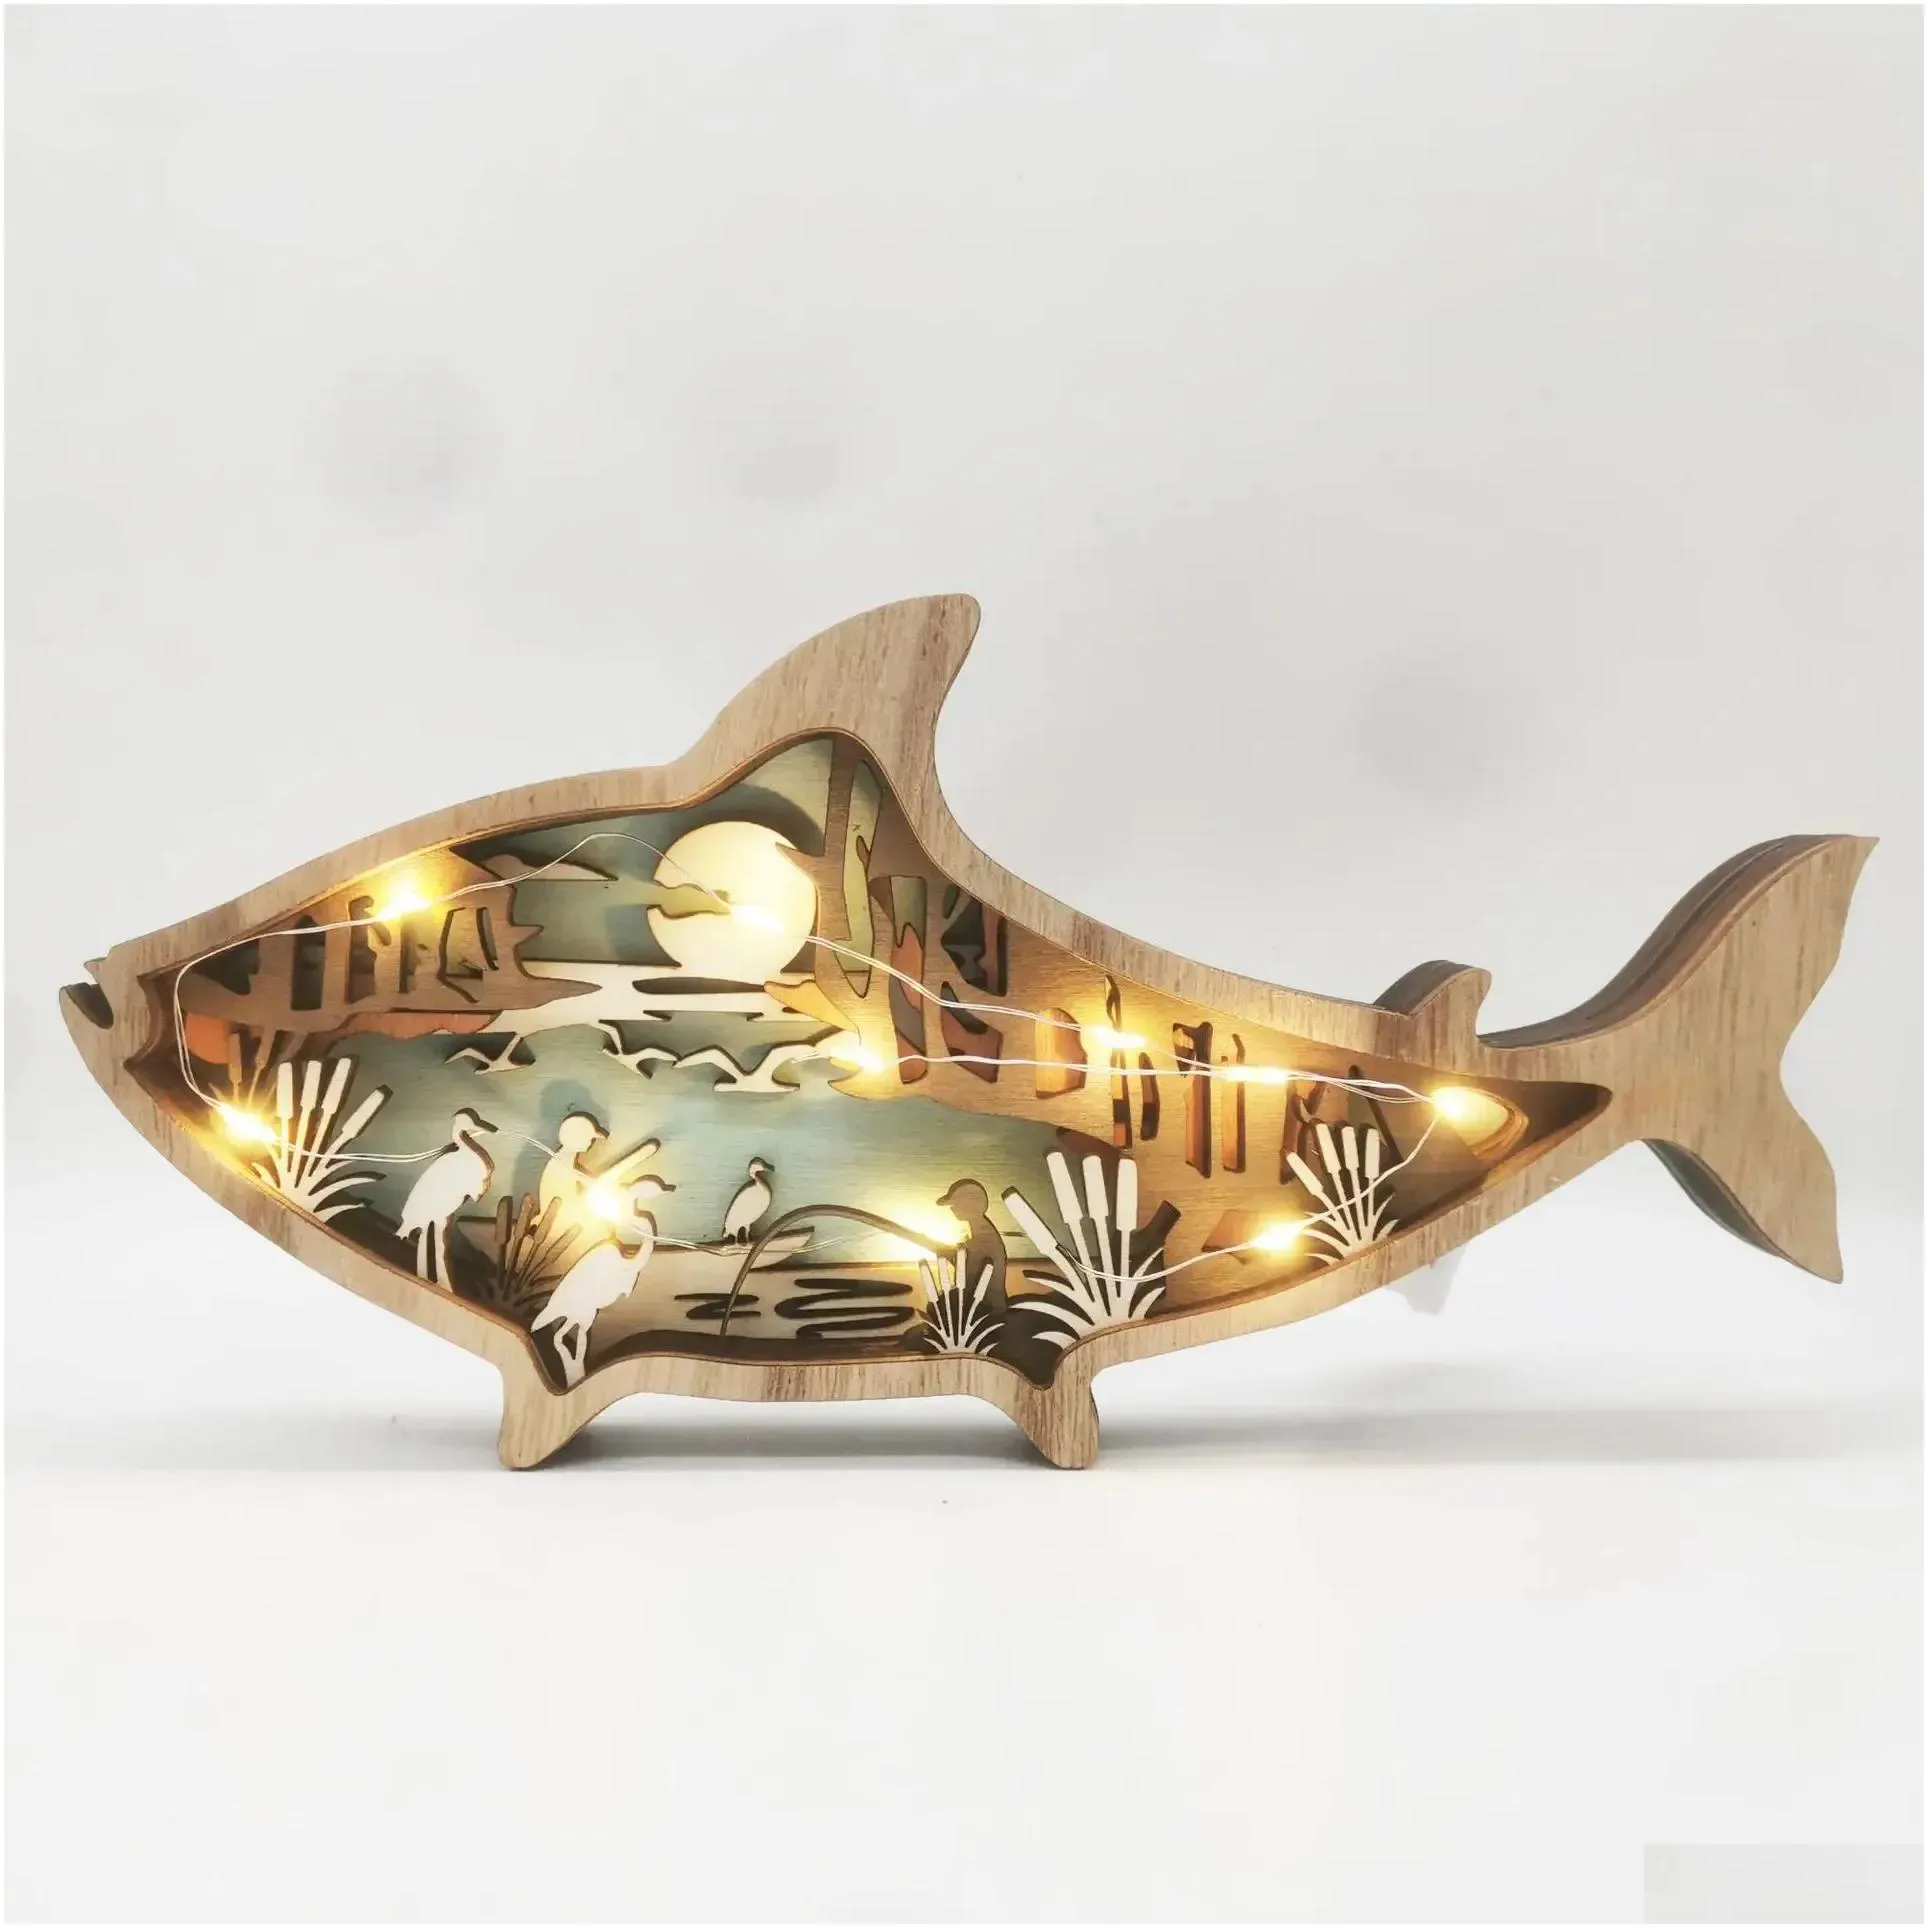 Tools New Marine Animal Wooden Handicraft Creative Marine Wind Wooden Carving Fish Table Decoration With Light 3D In Home Room